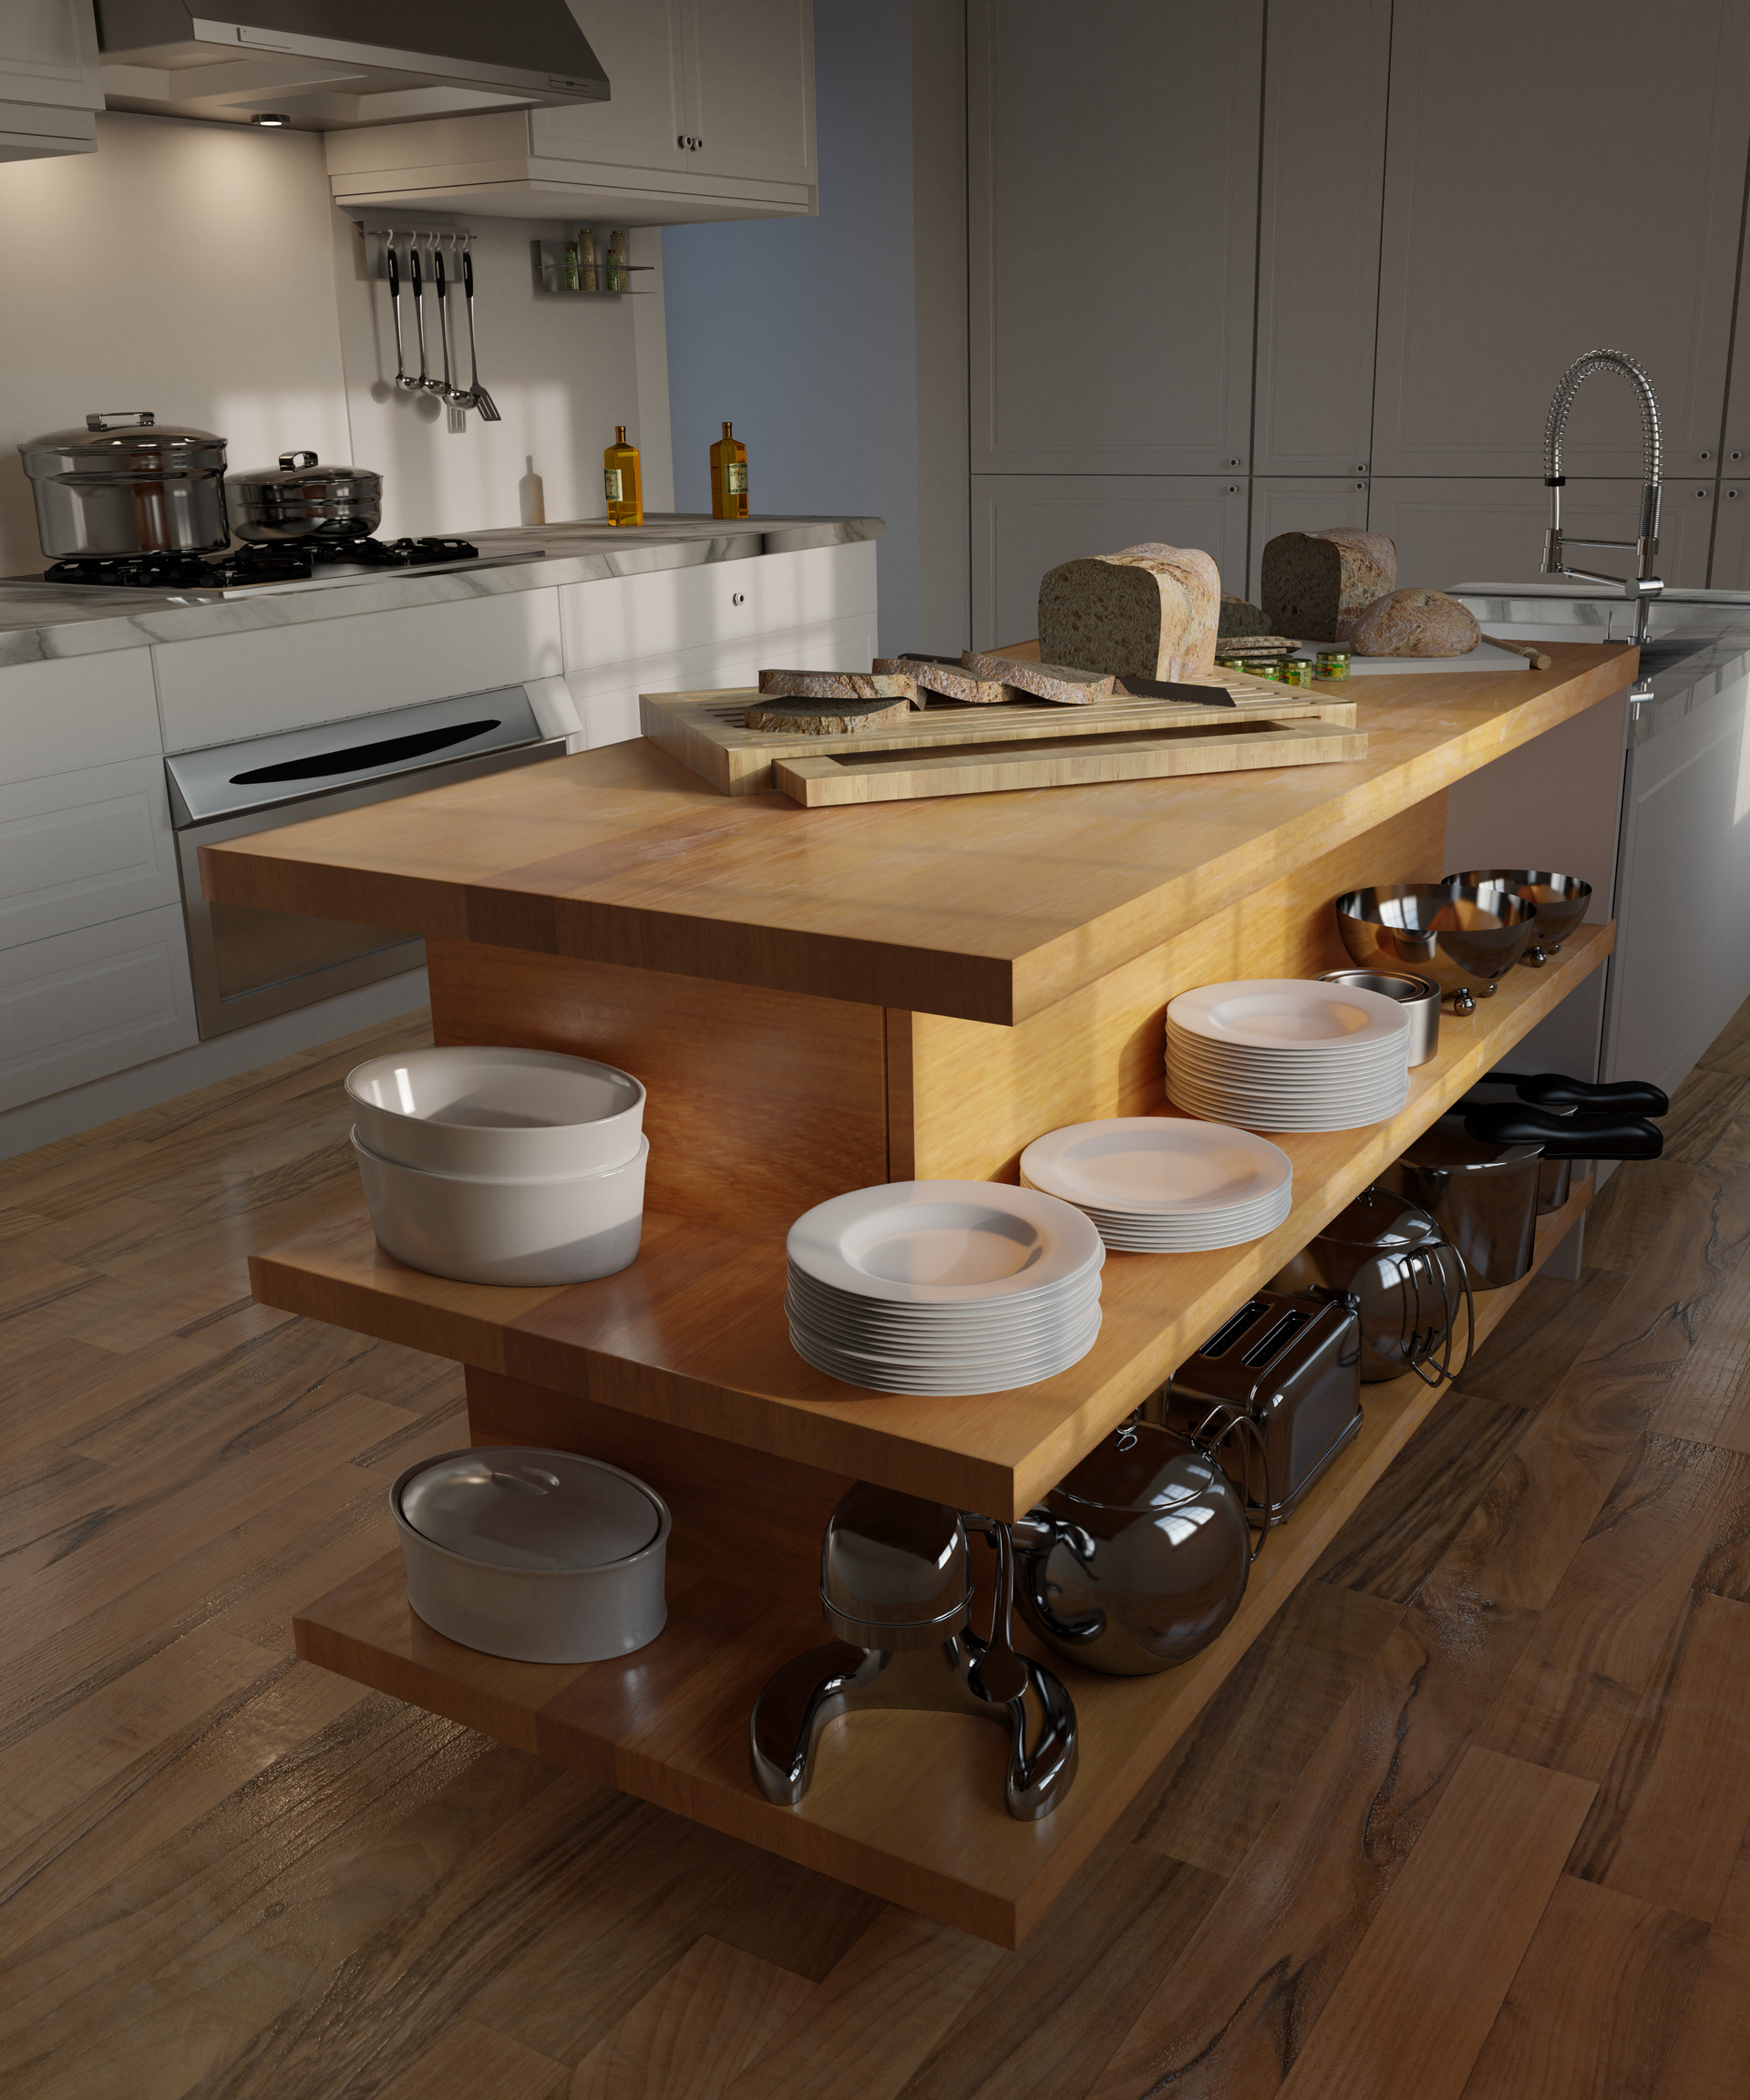 Artstation Realistic Kitchen Using Cycles Originally By Andrew Price Updated With Realistic Bread Model Julian Neri